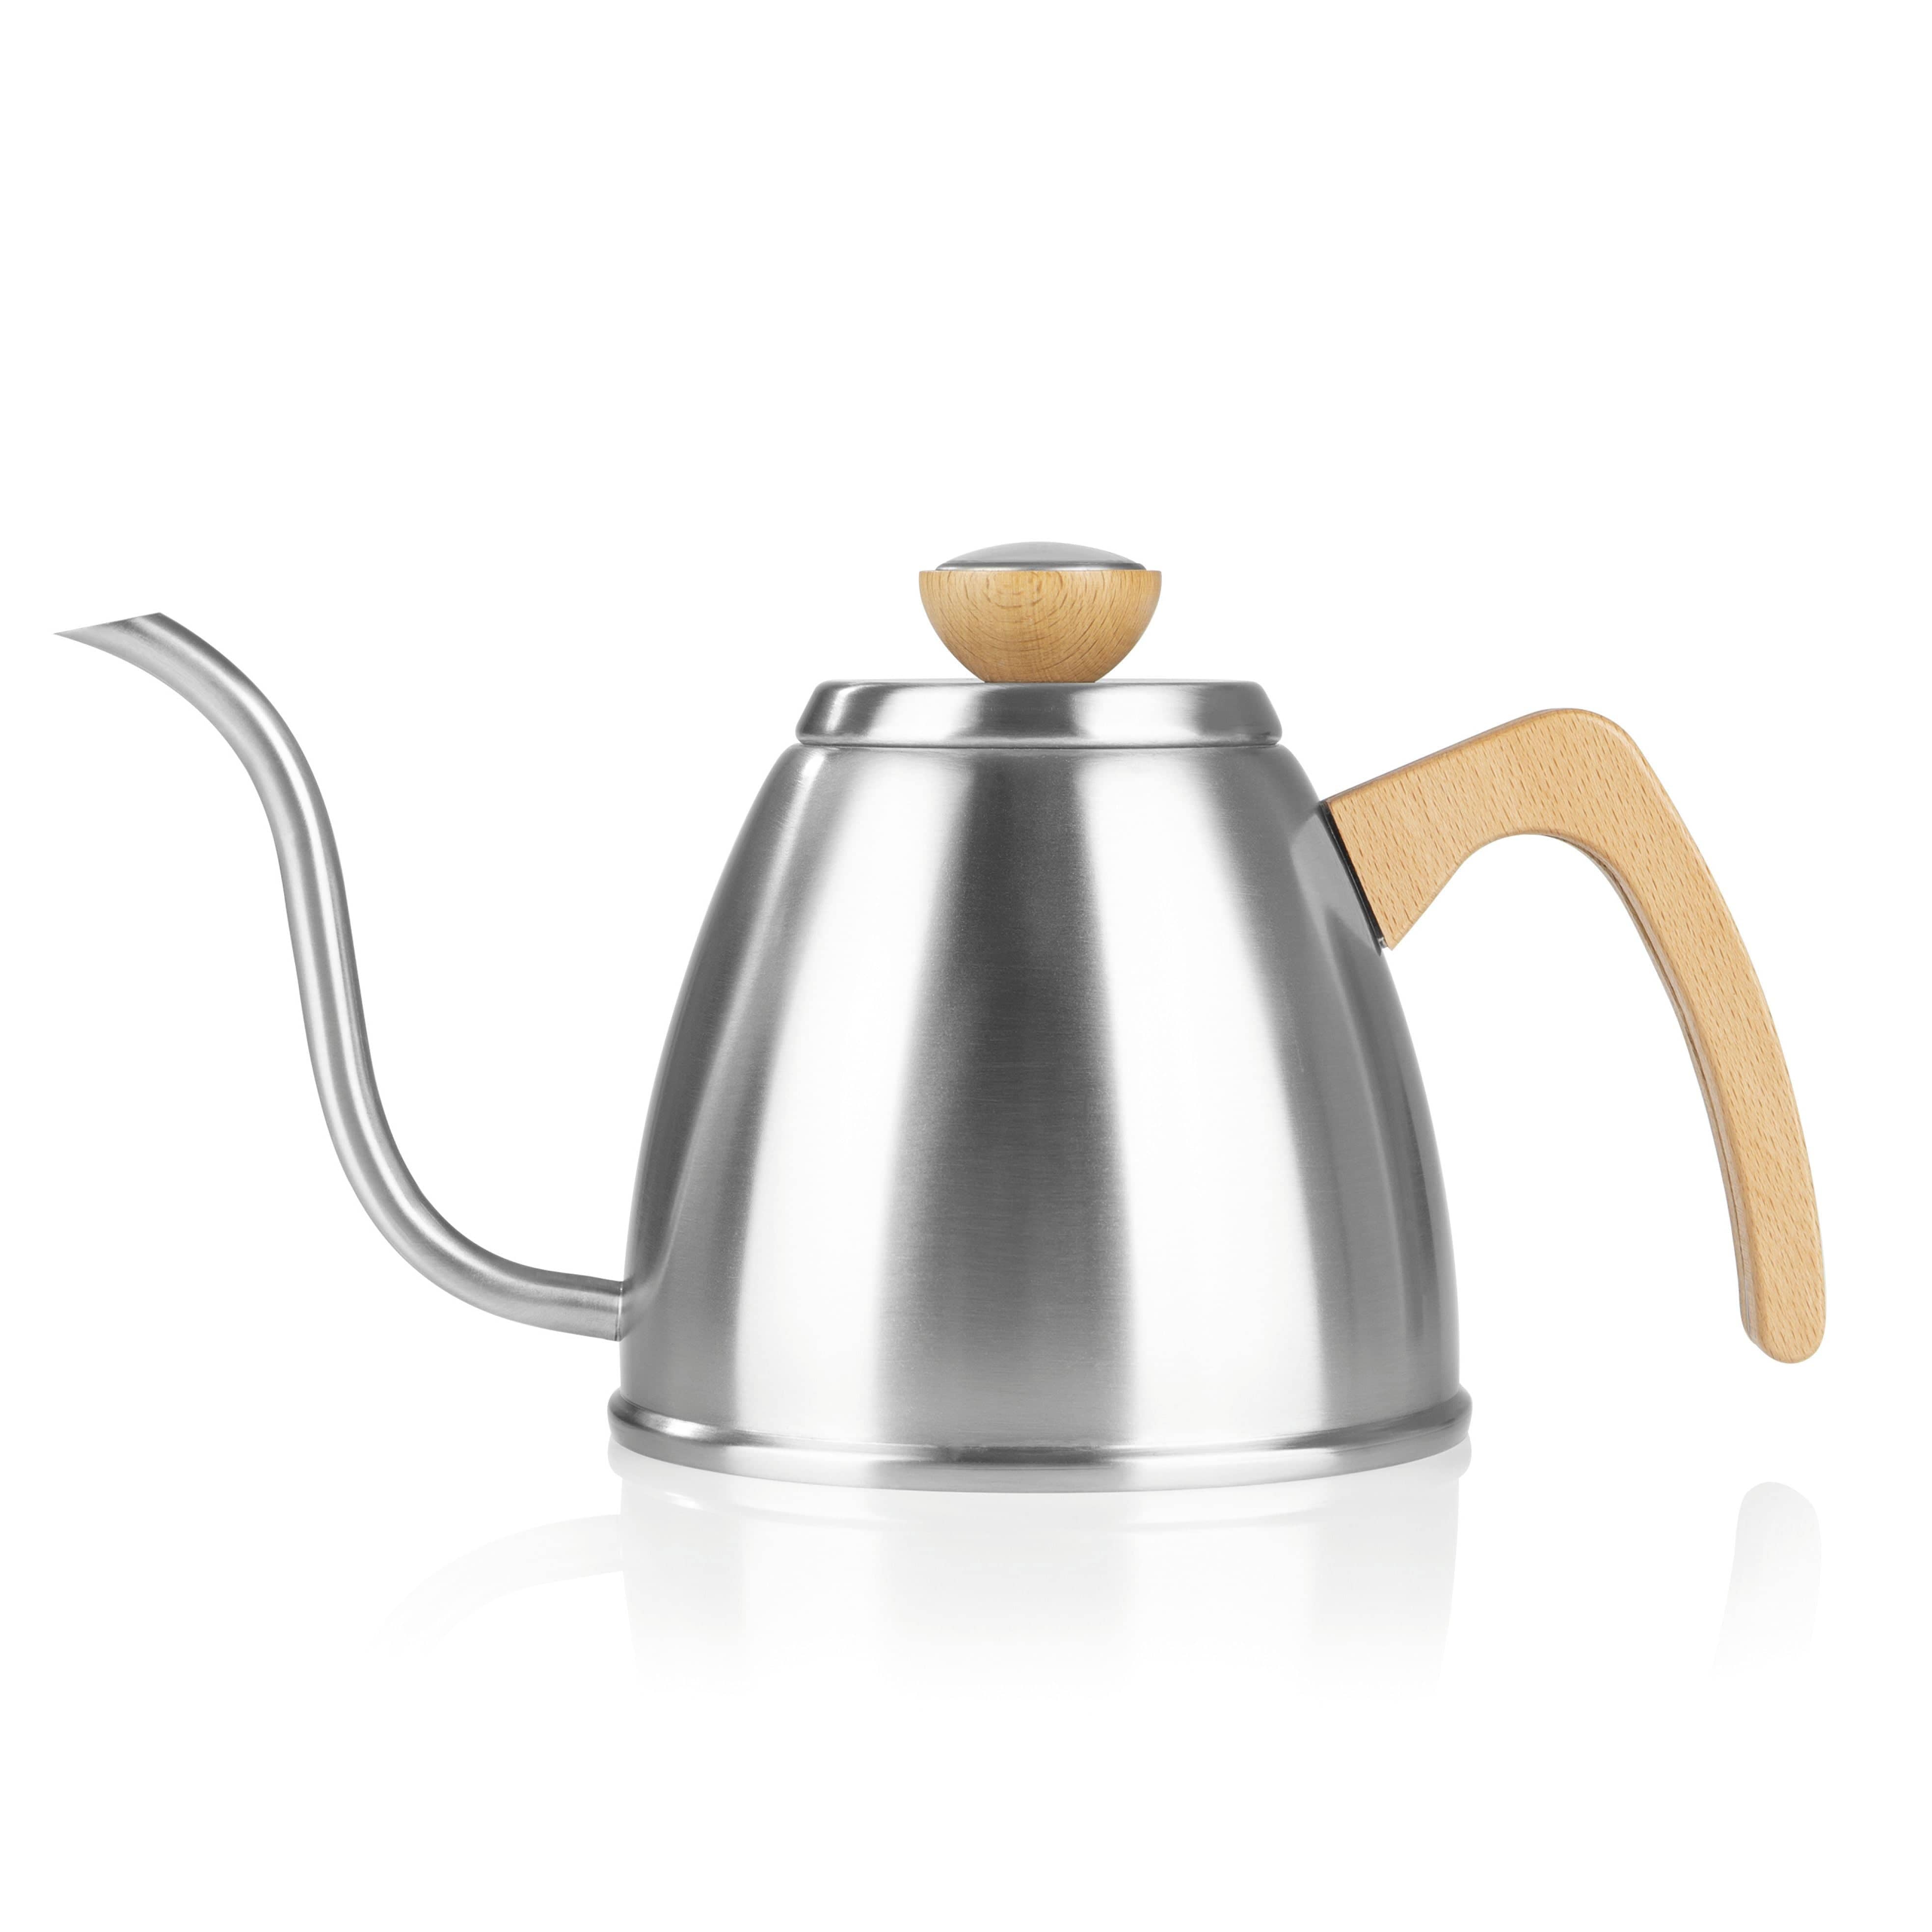 POUR OVER Kettle with Thermometer - Stainless Steel and Beech Wood